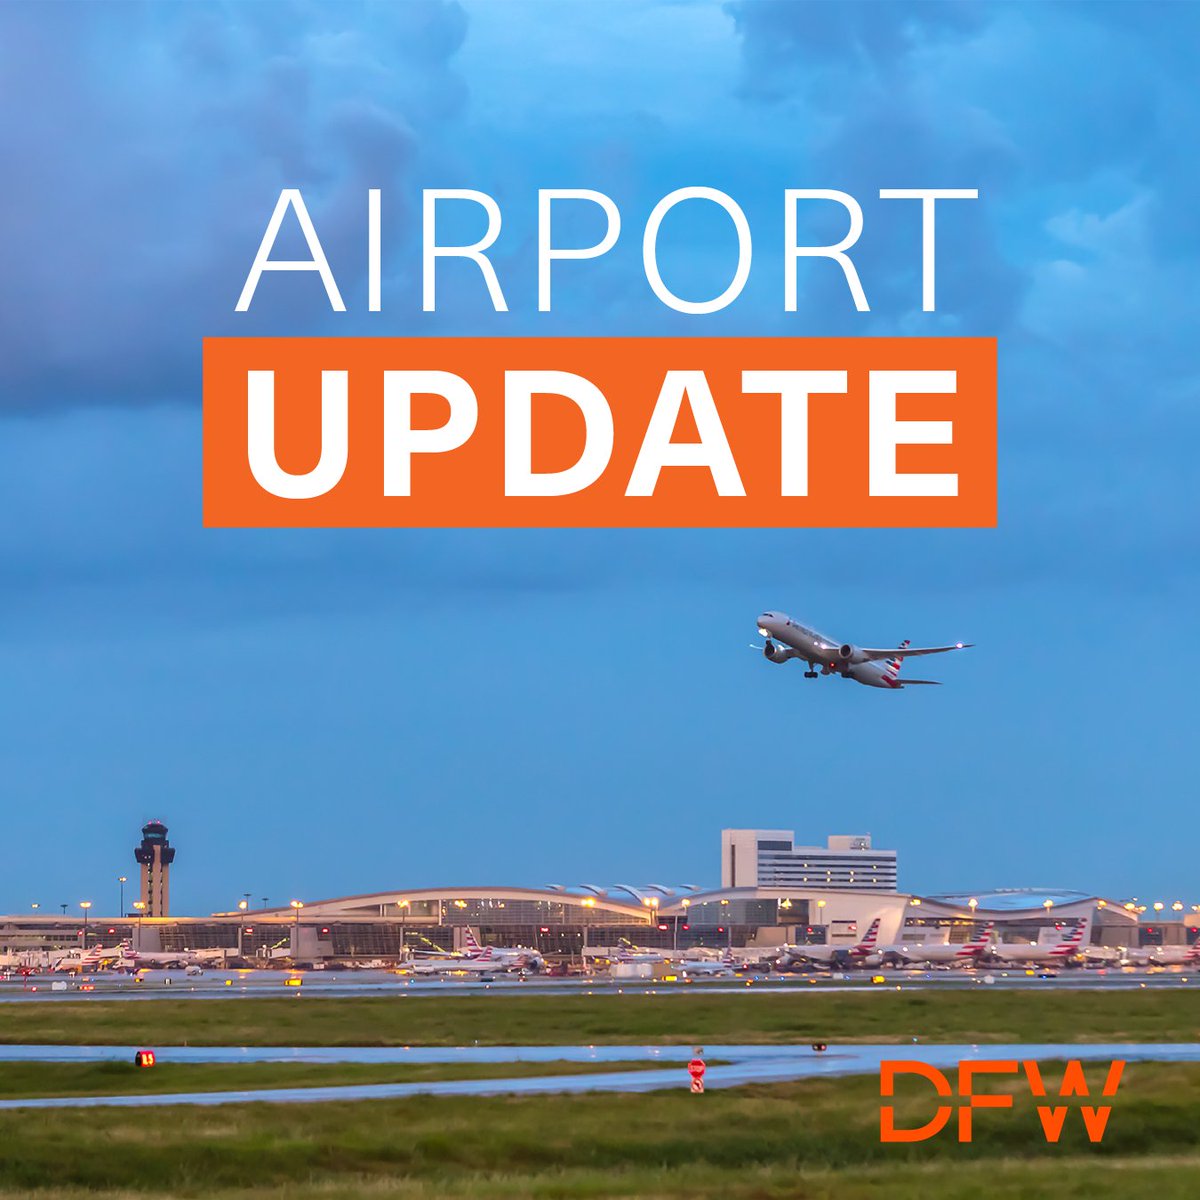 SAFETY DRILL TODAY: From 9-11 a.m. Wednesday, you may see first responders on airport property for a joint functional exercise along W. 19th Street. Please be aware, this is only a drill and should not impact airport customers.